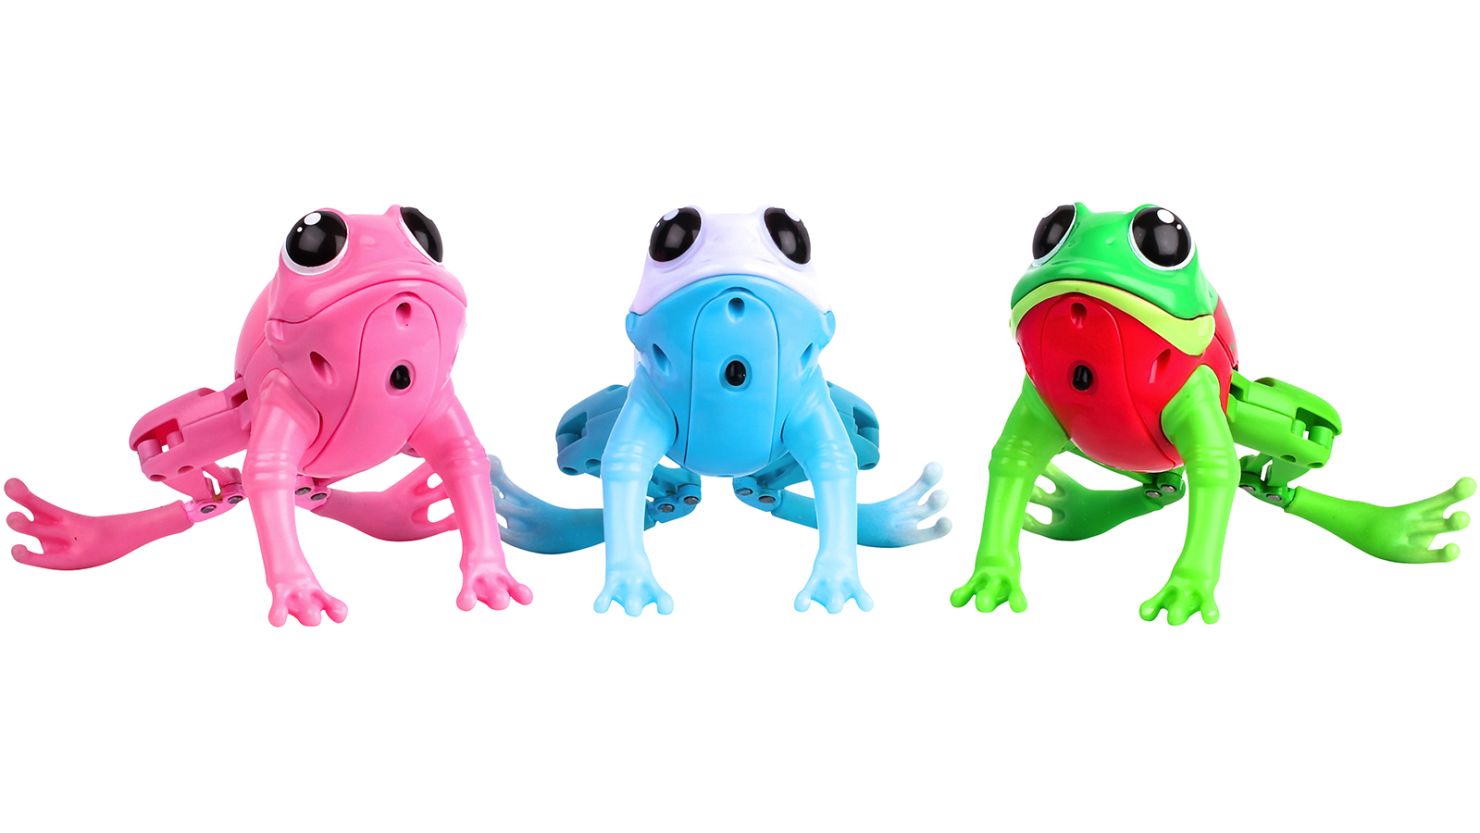 More than 400,000 plastic toy frogs recalled